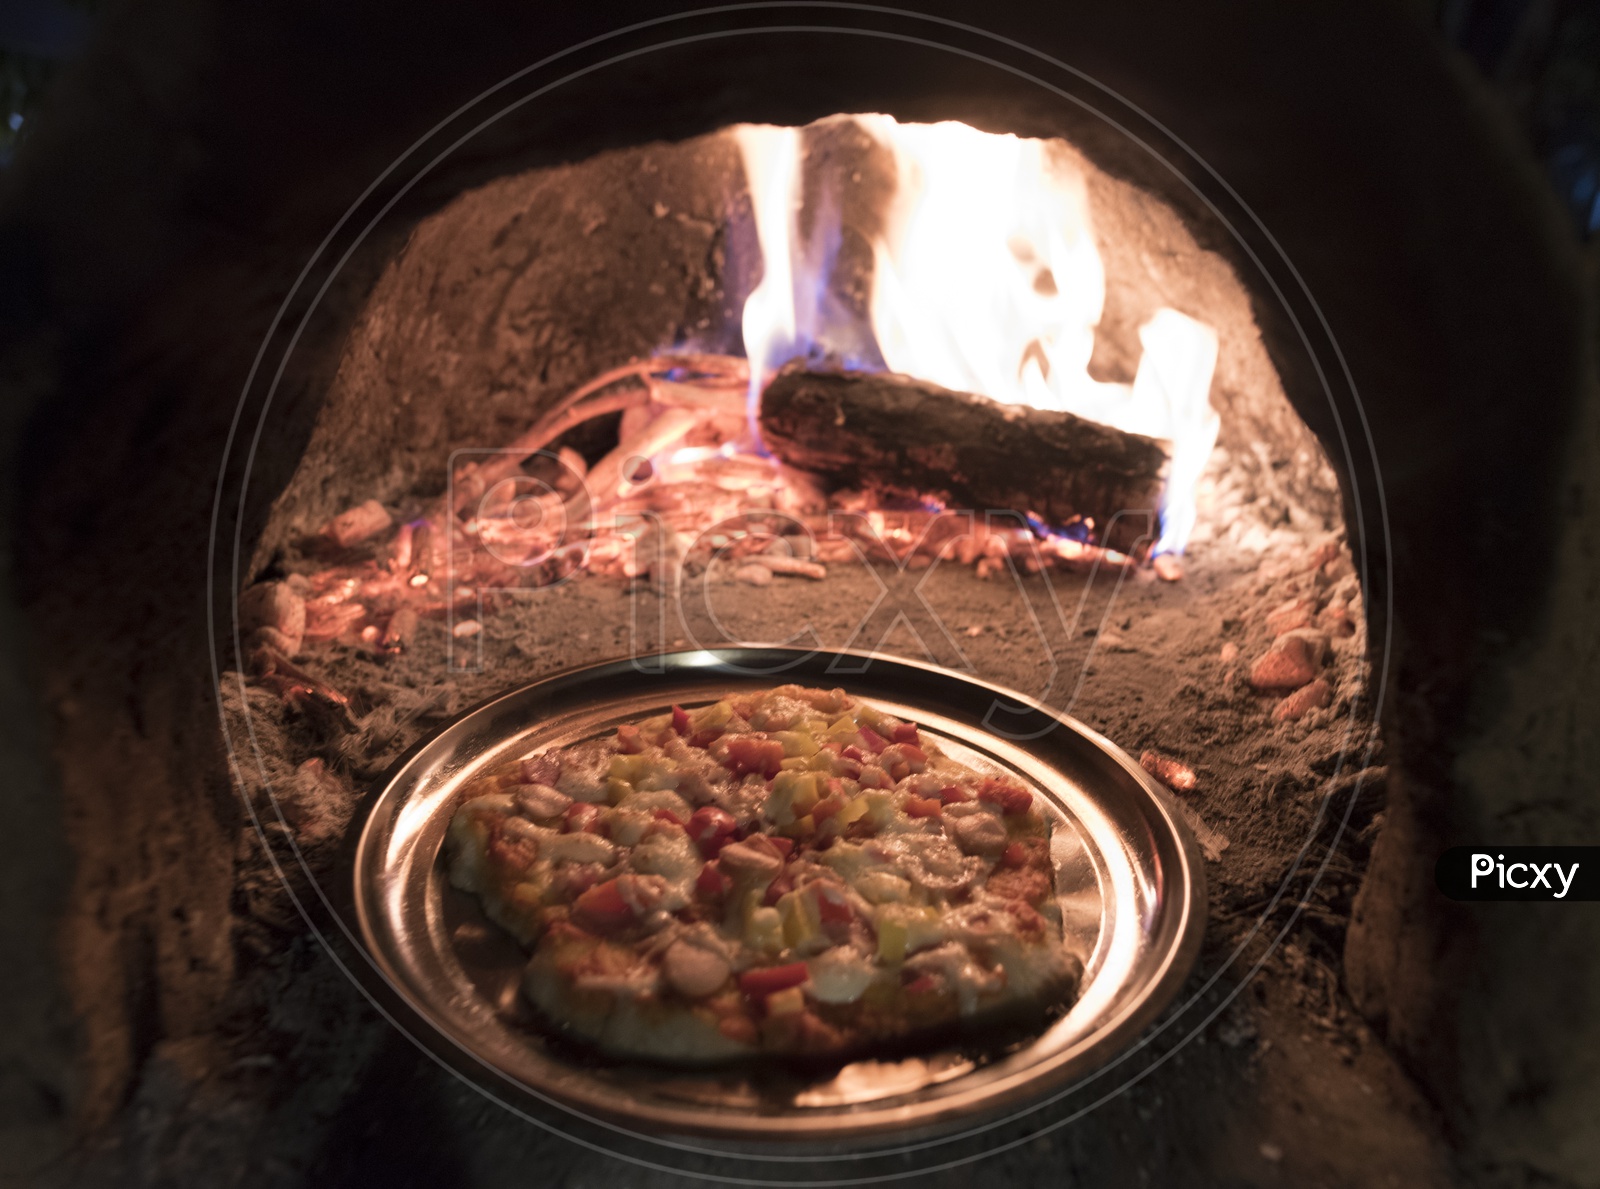 homemade pizza In a Country Oven